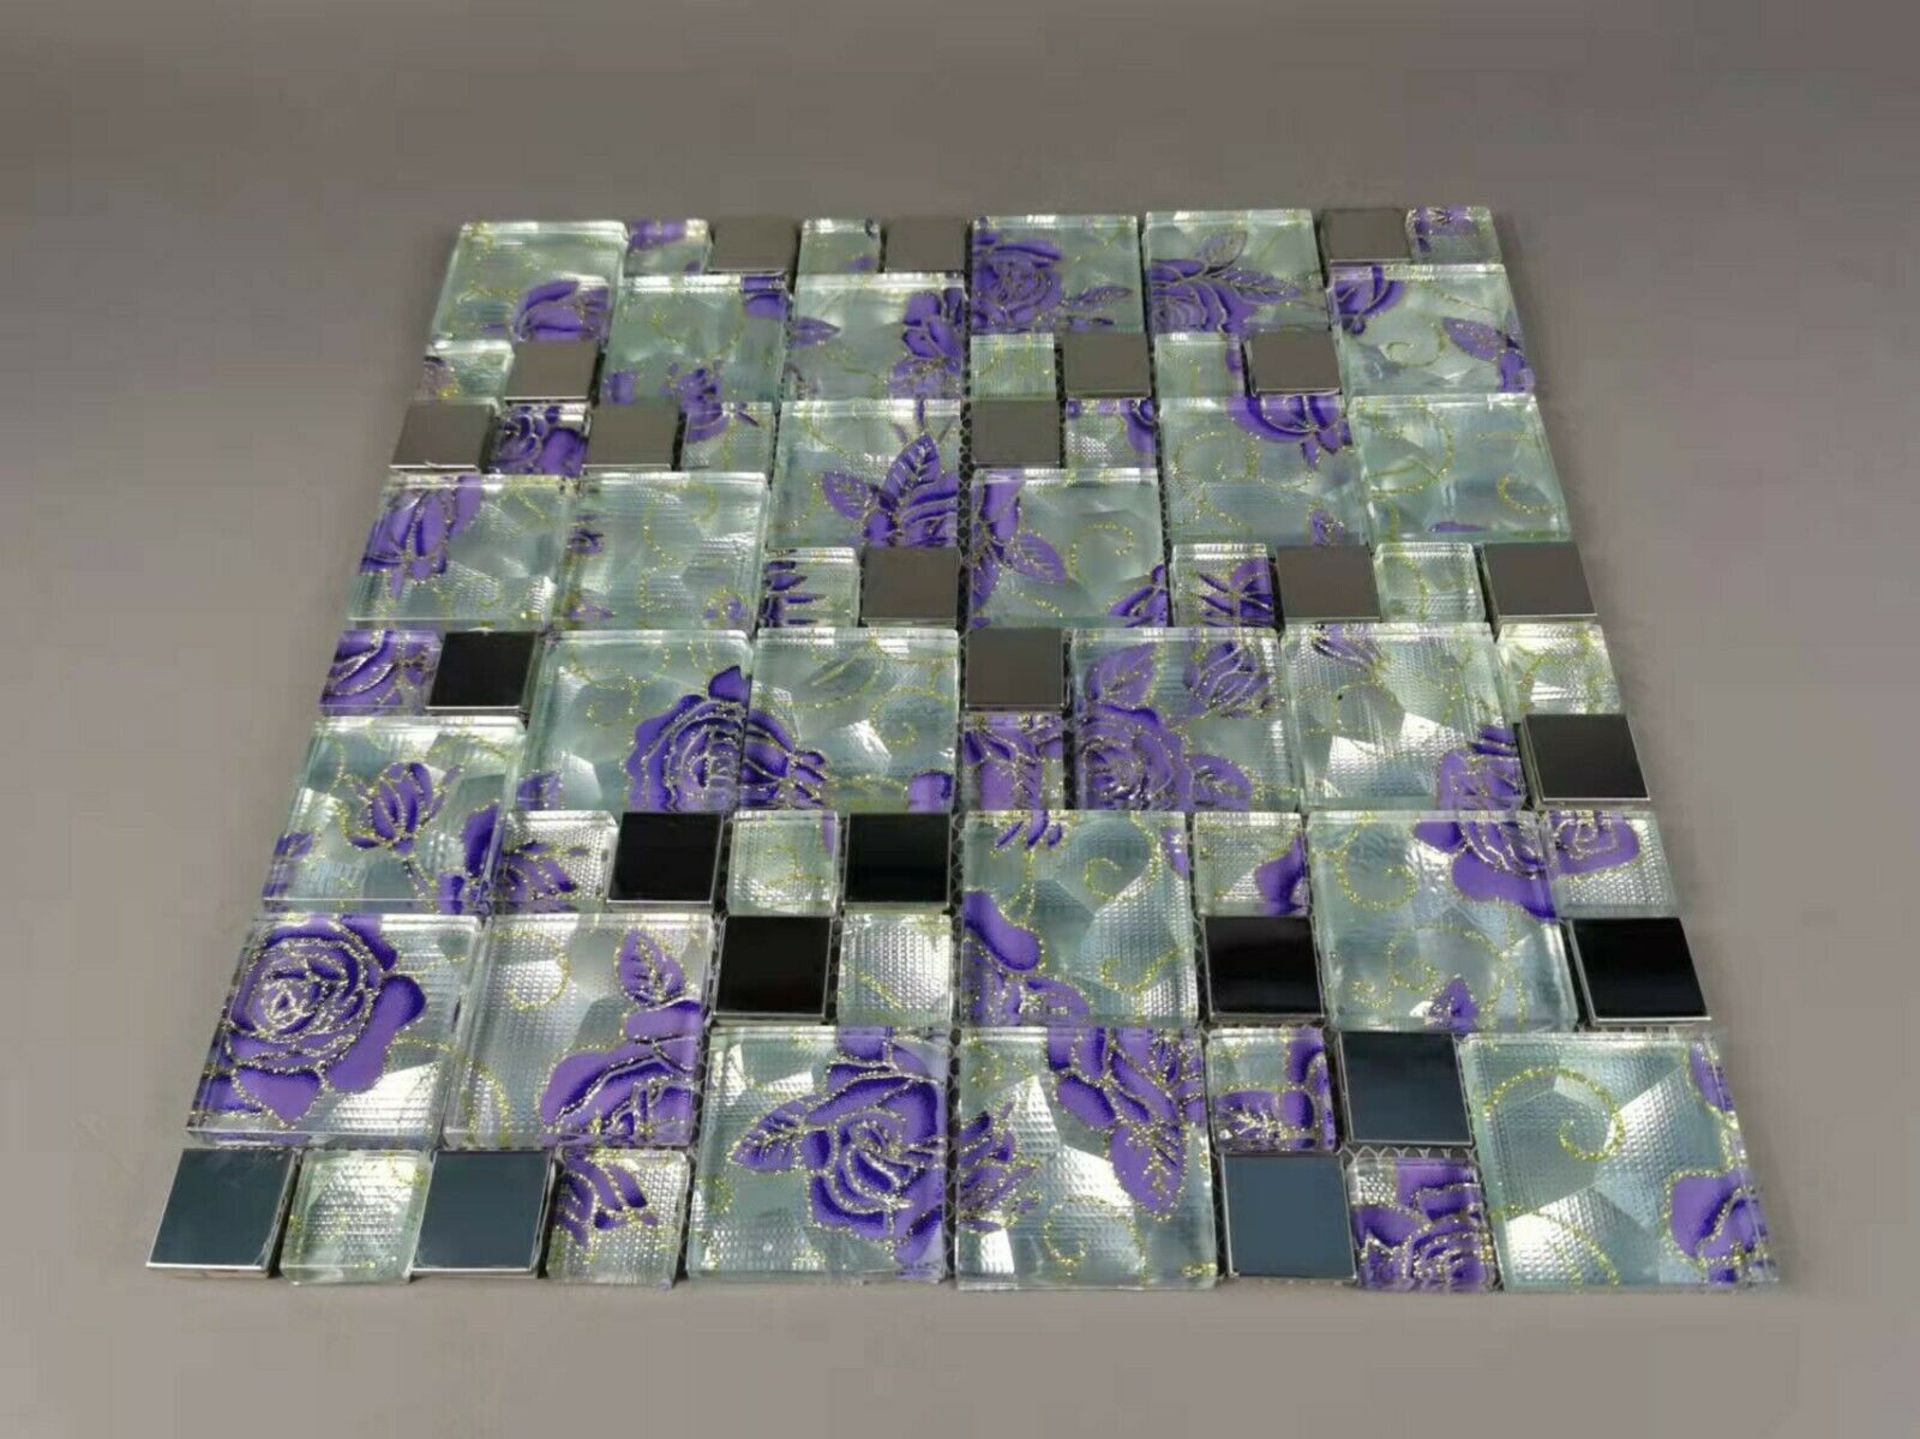 One Square Metre - Stock Clearance High Quality Glass/Stainless Steel Mosaic Tiles - 11 sheets - Image 2 of 4